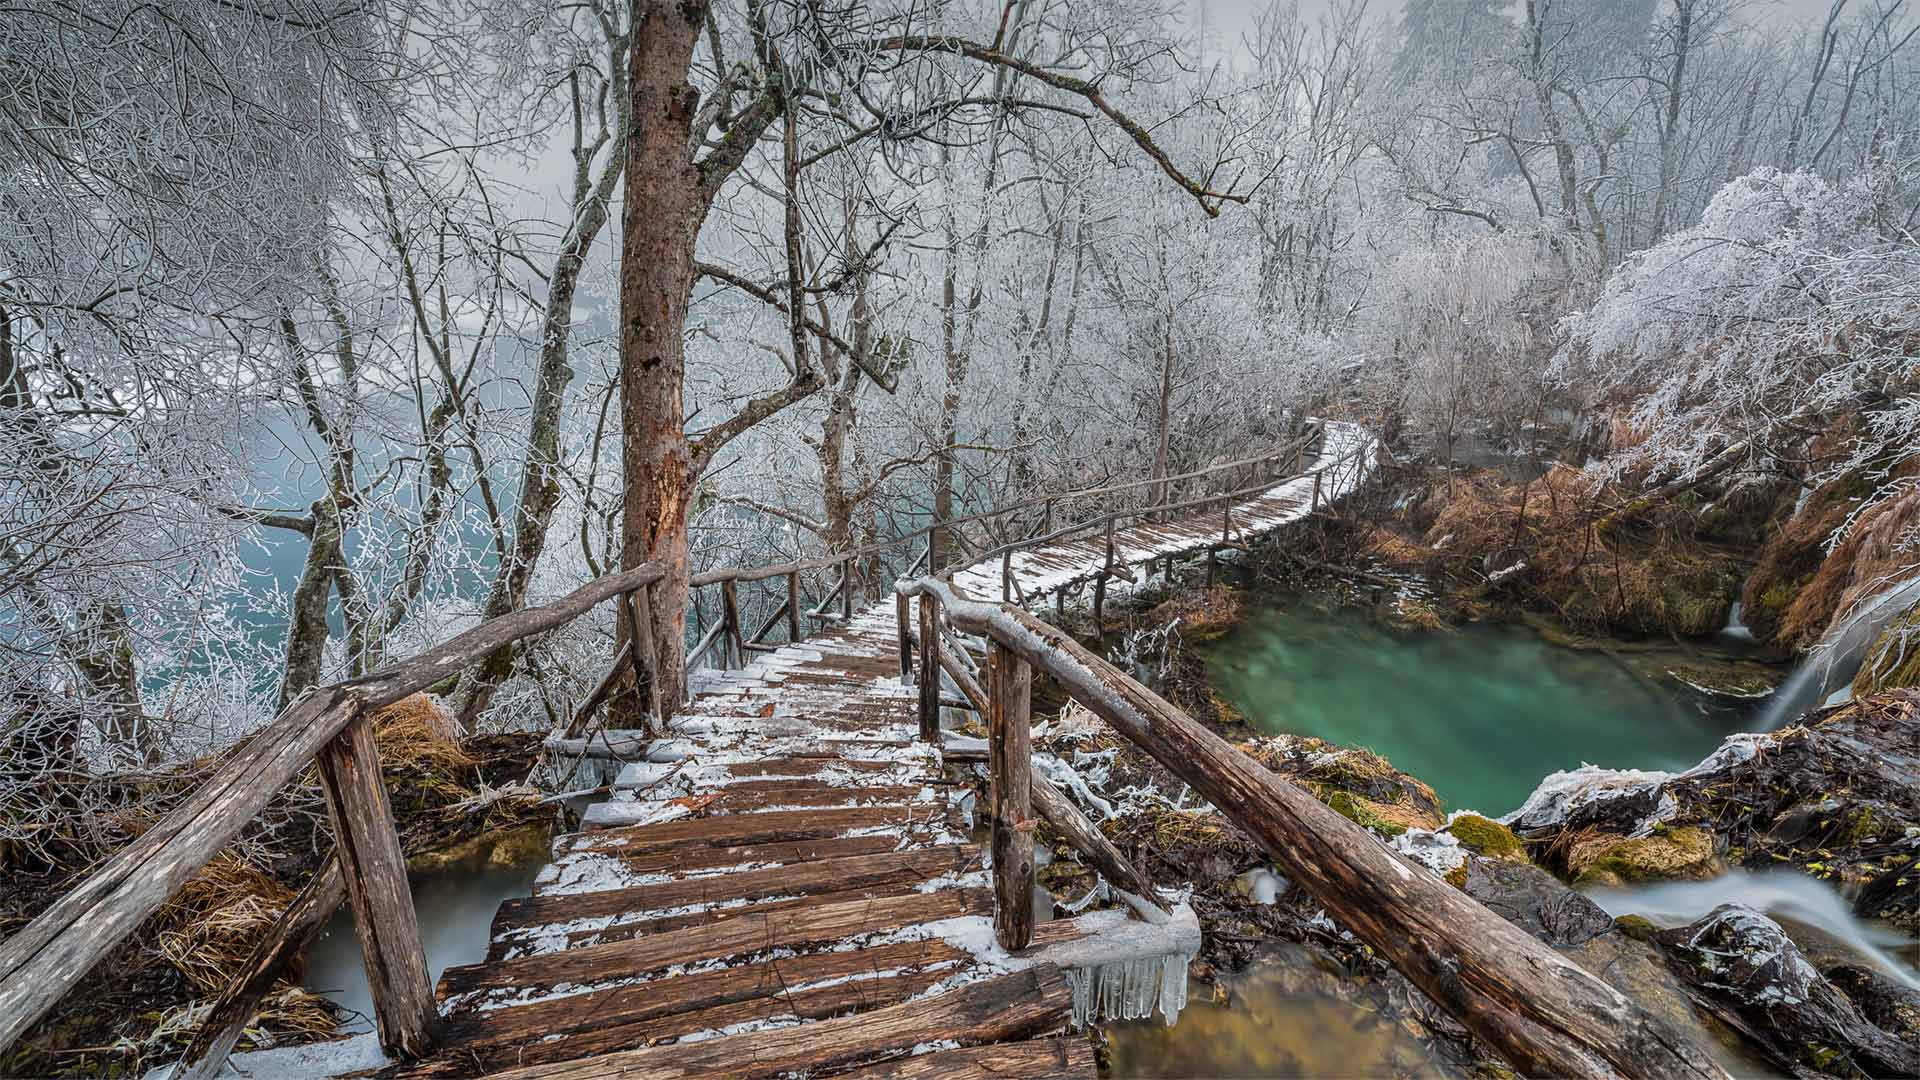 Elevated path in Plitvice Lakes National Park, Croatia - Alessandro Laporta/Offset by Shutterstock)